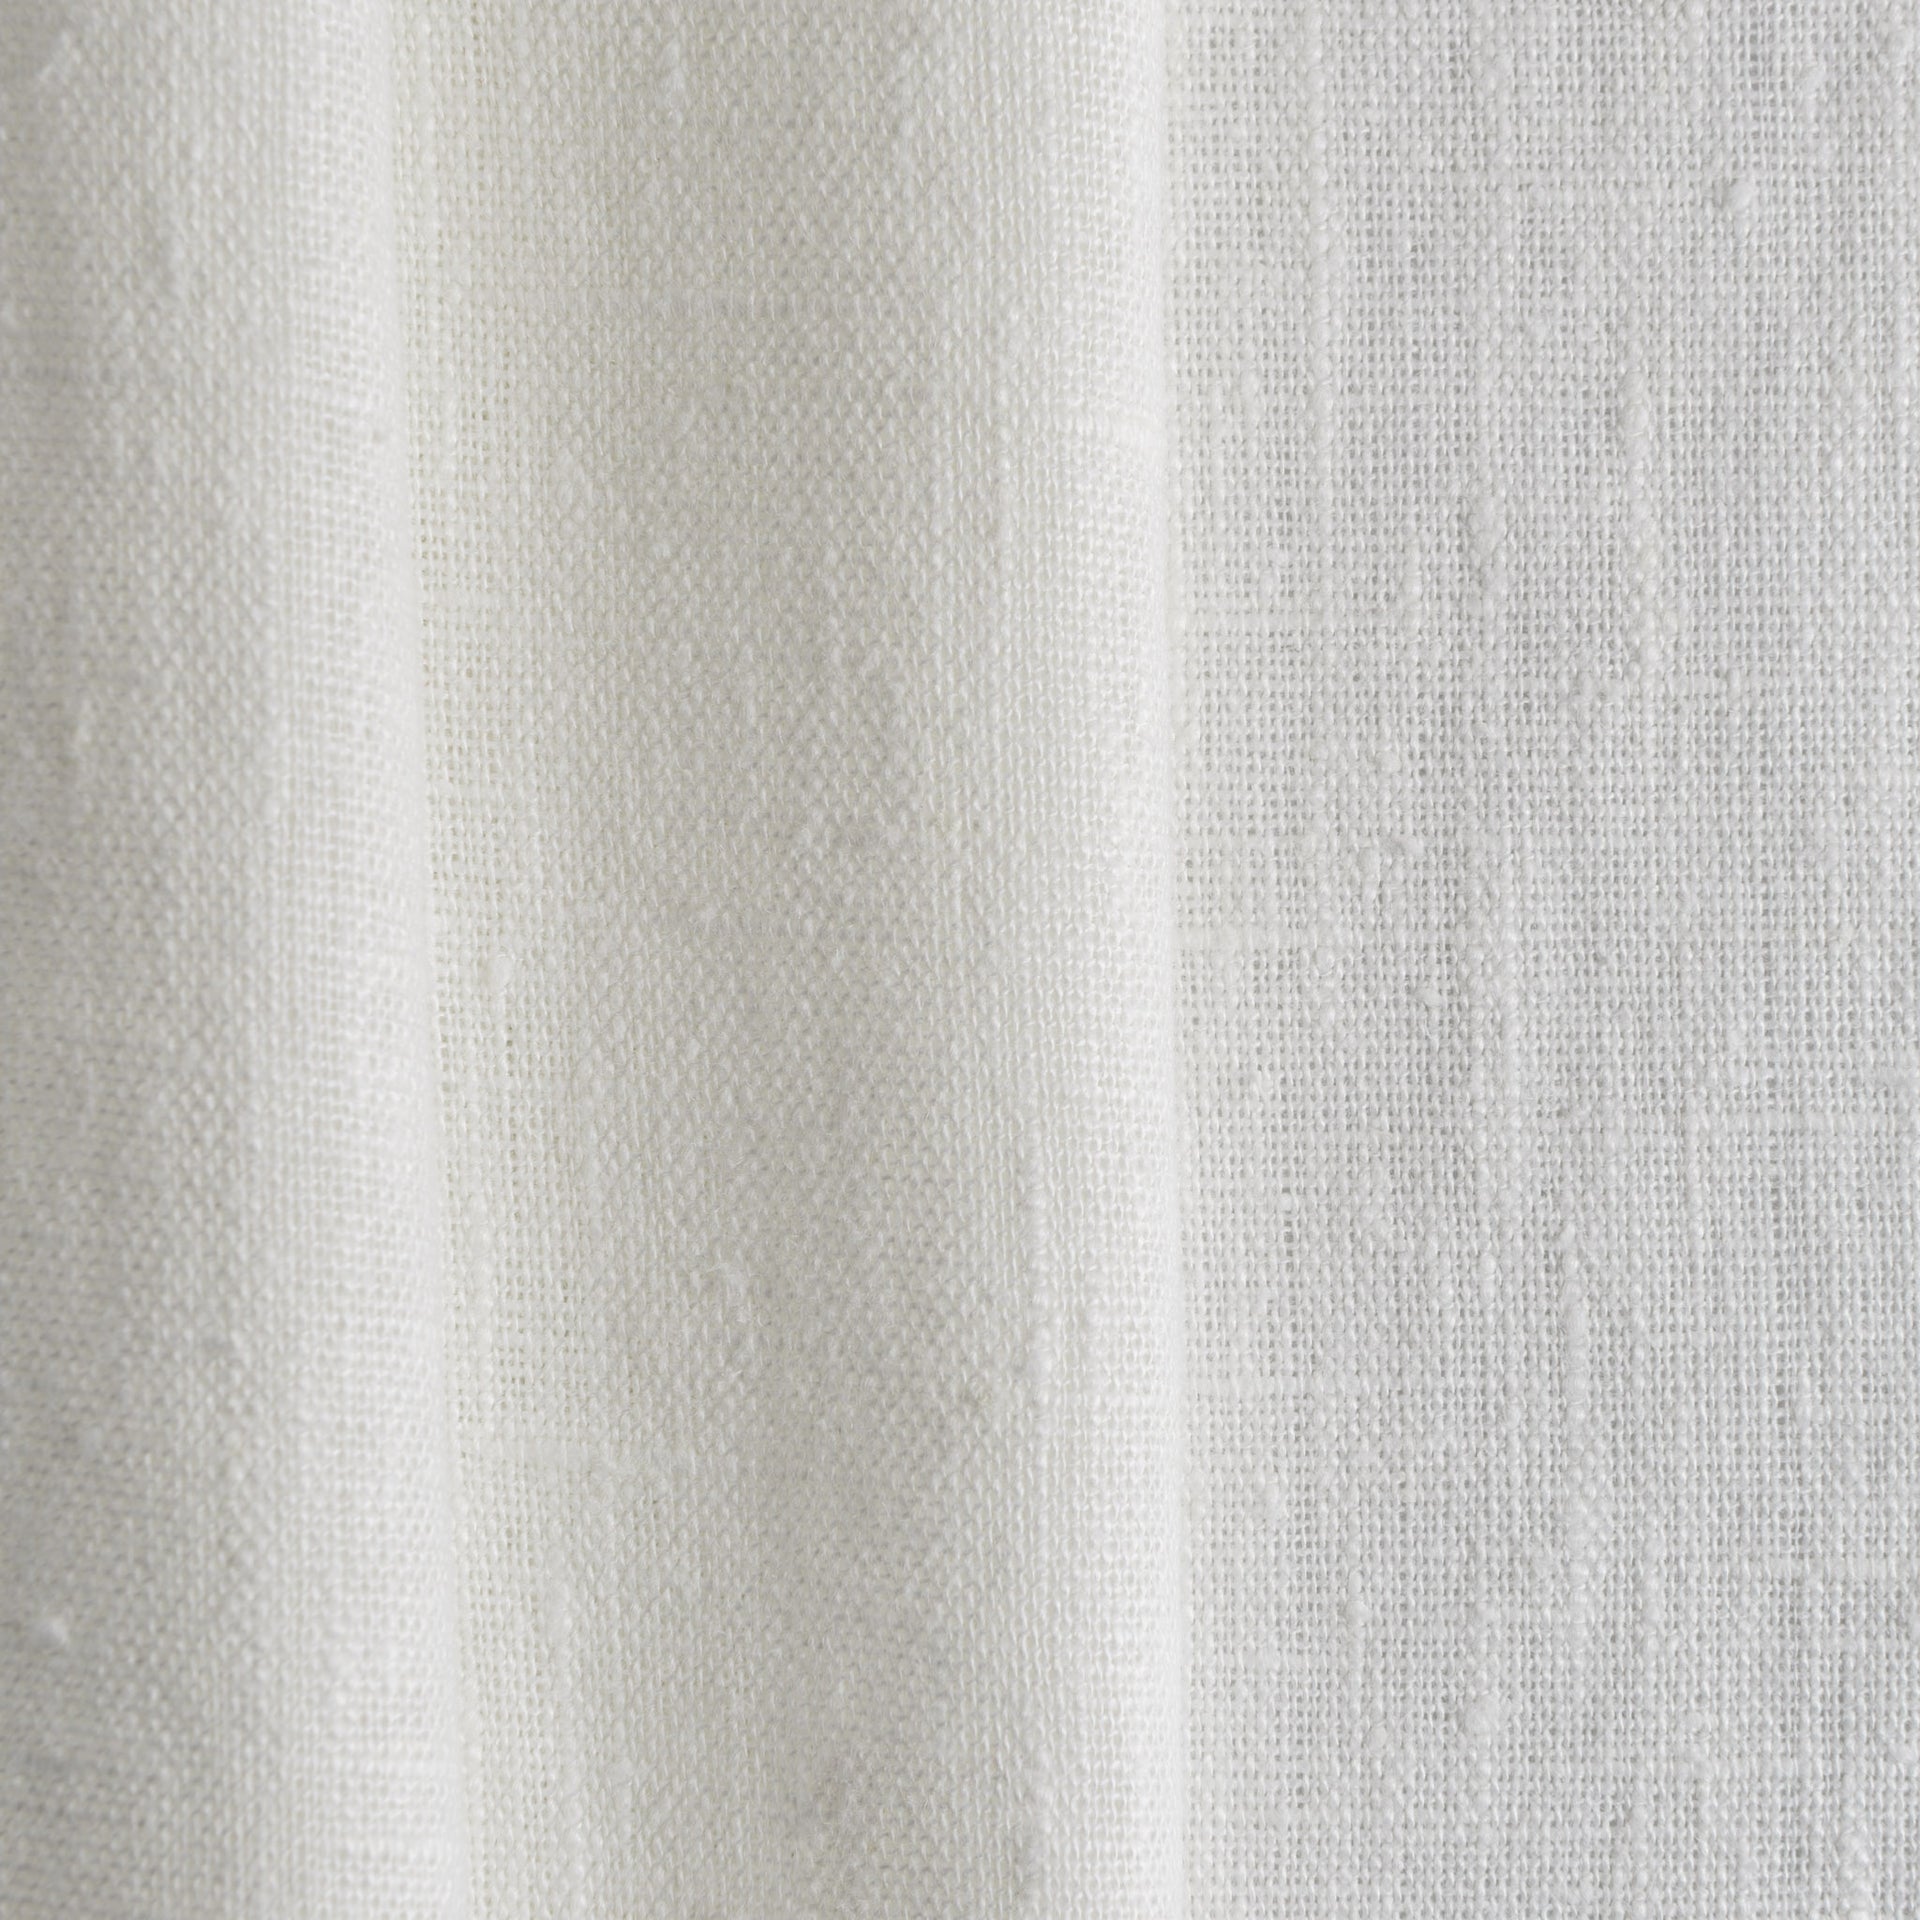 White Linen Fabric, Washed Linen Flax, Pure White Linen Fabric, Medium  Weight Linen for Curtains, Dress, Eco Friendly Linen Fabric 